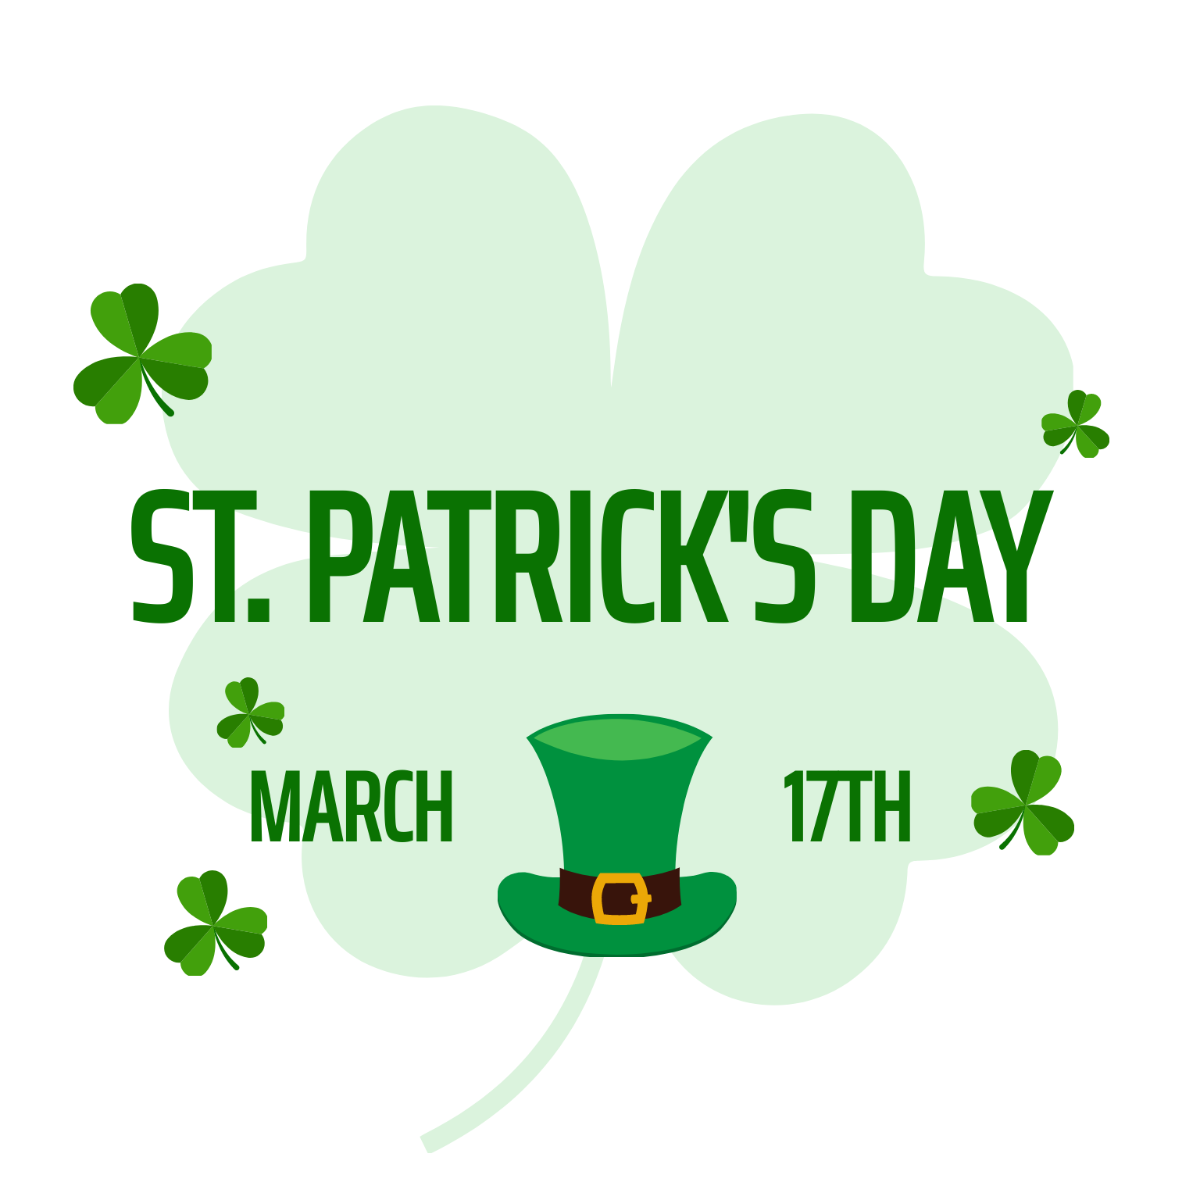 St. Patrick's Day Text Vector